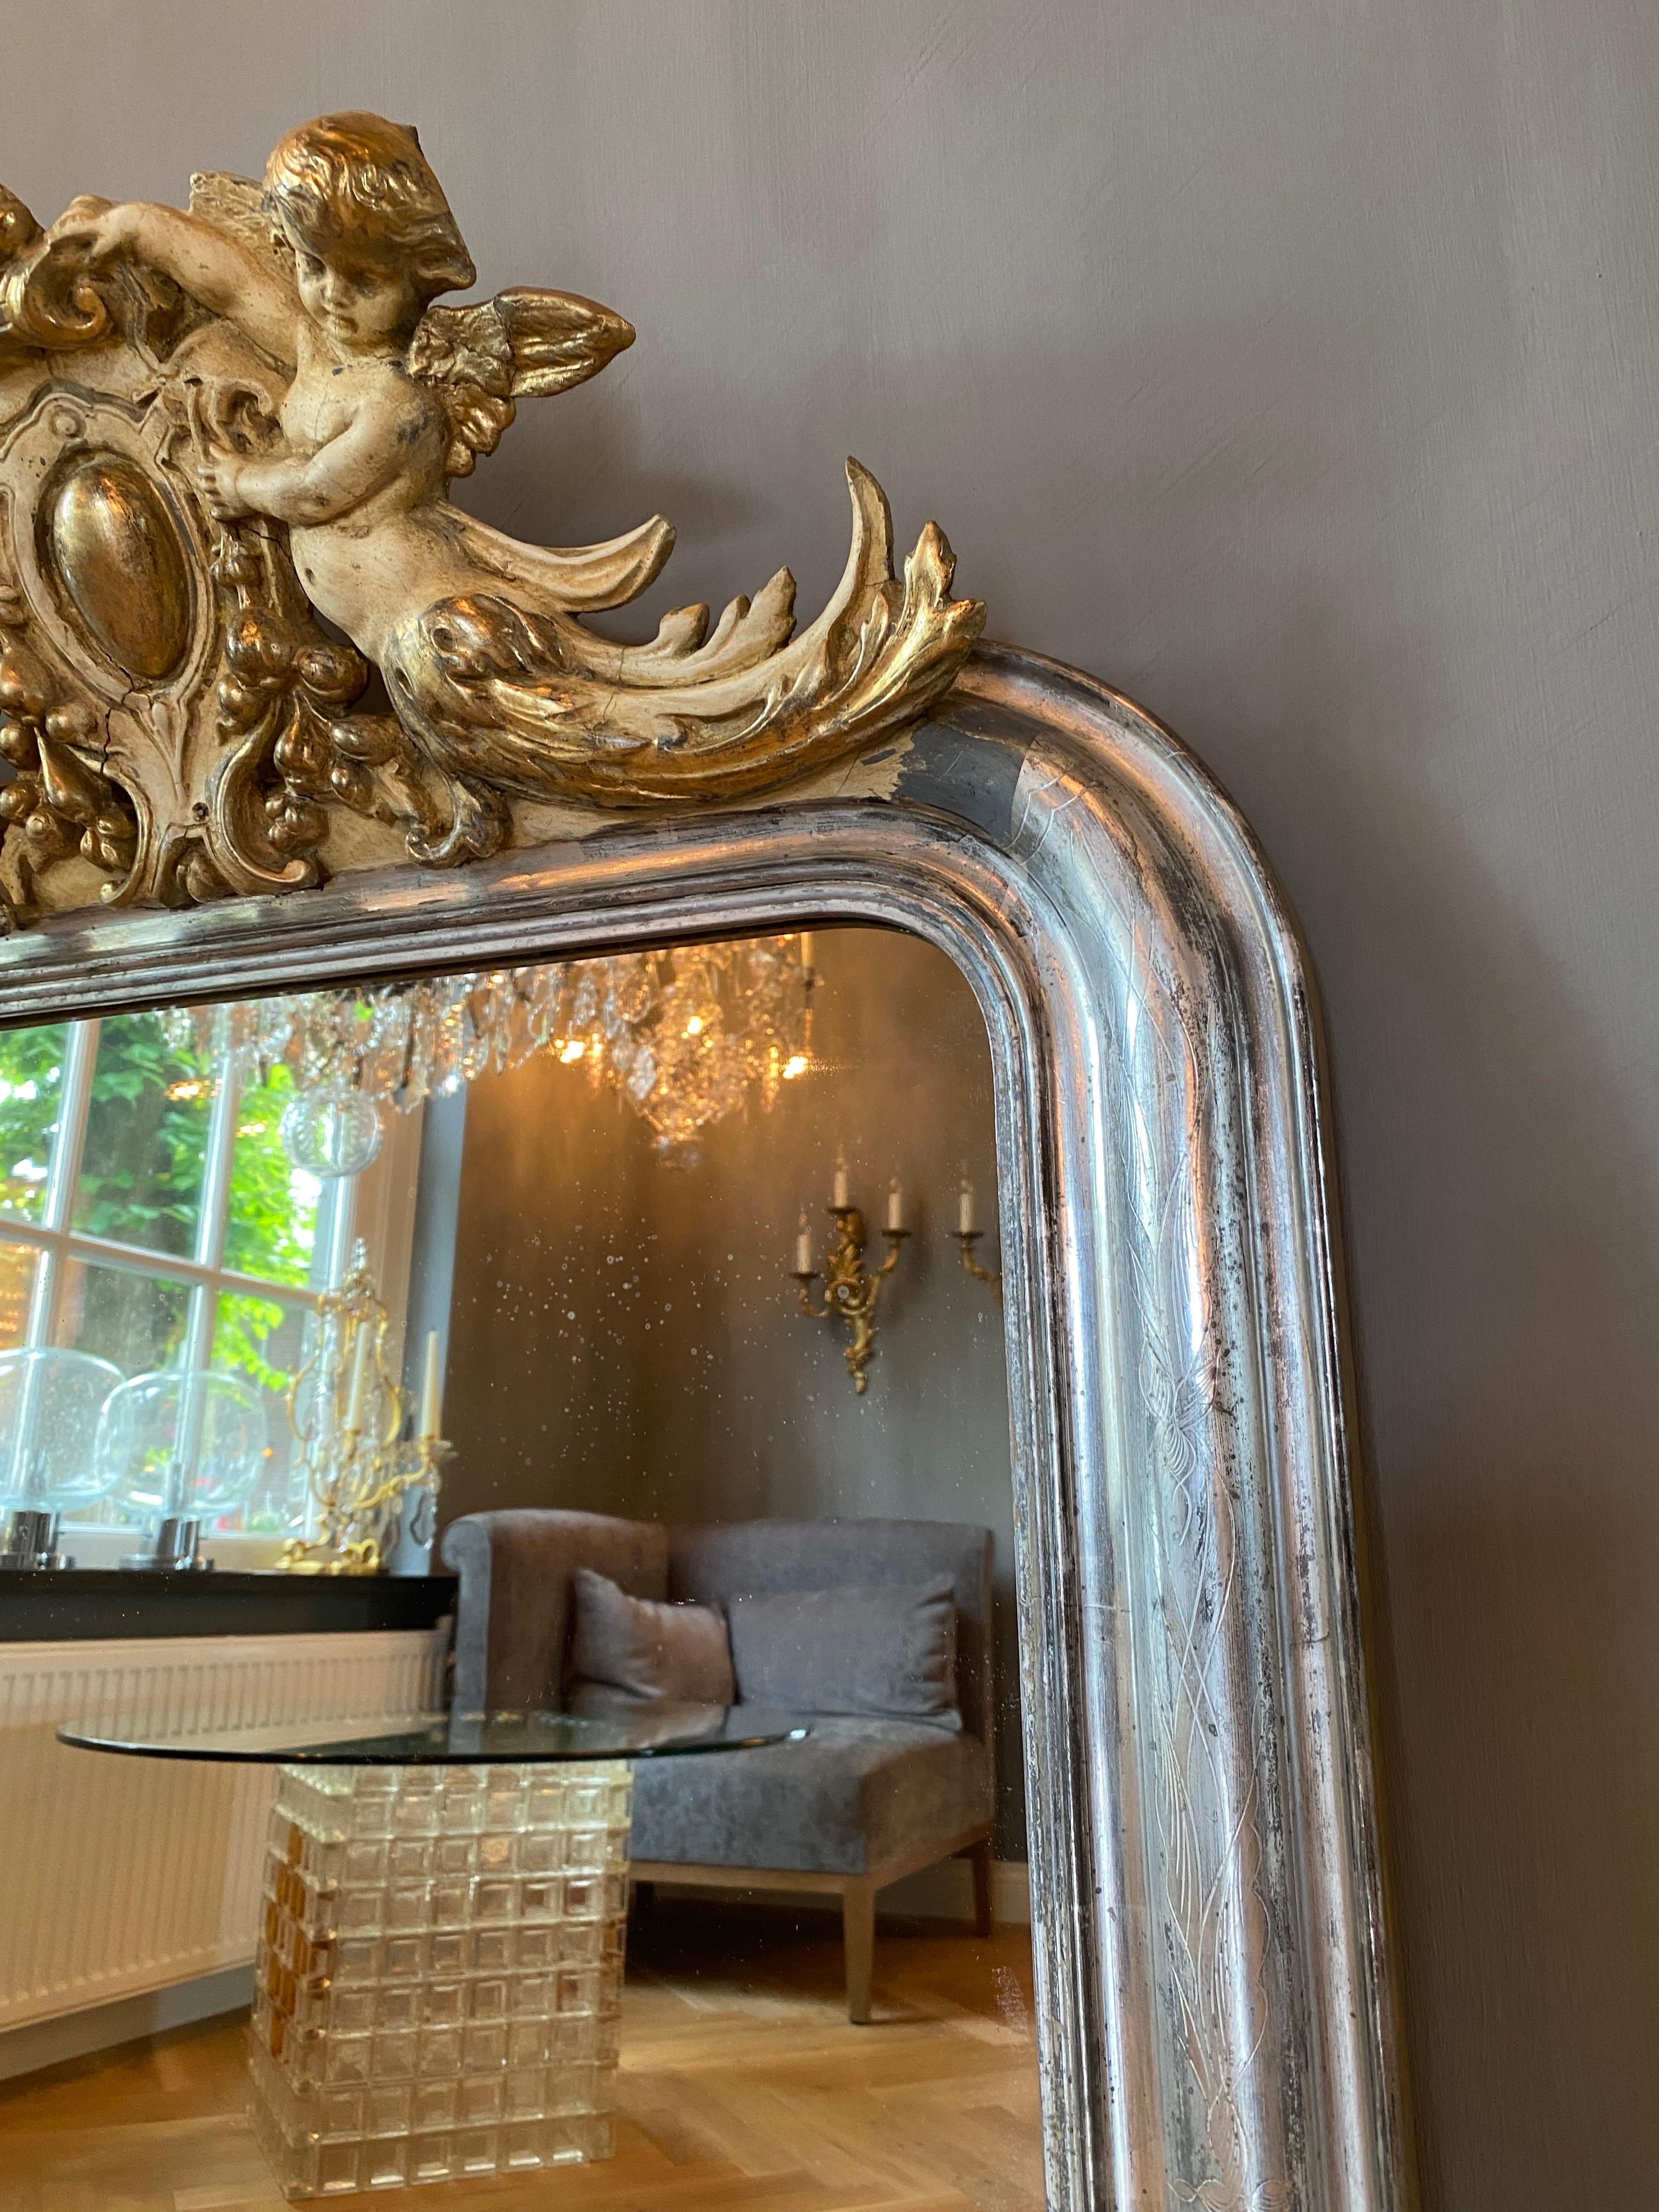 Louis Philippe 19th century silver leaf gilt French mirror with a crest with putti